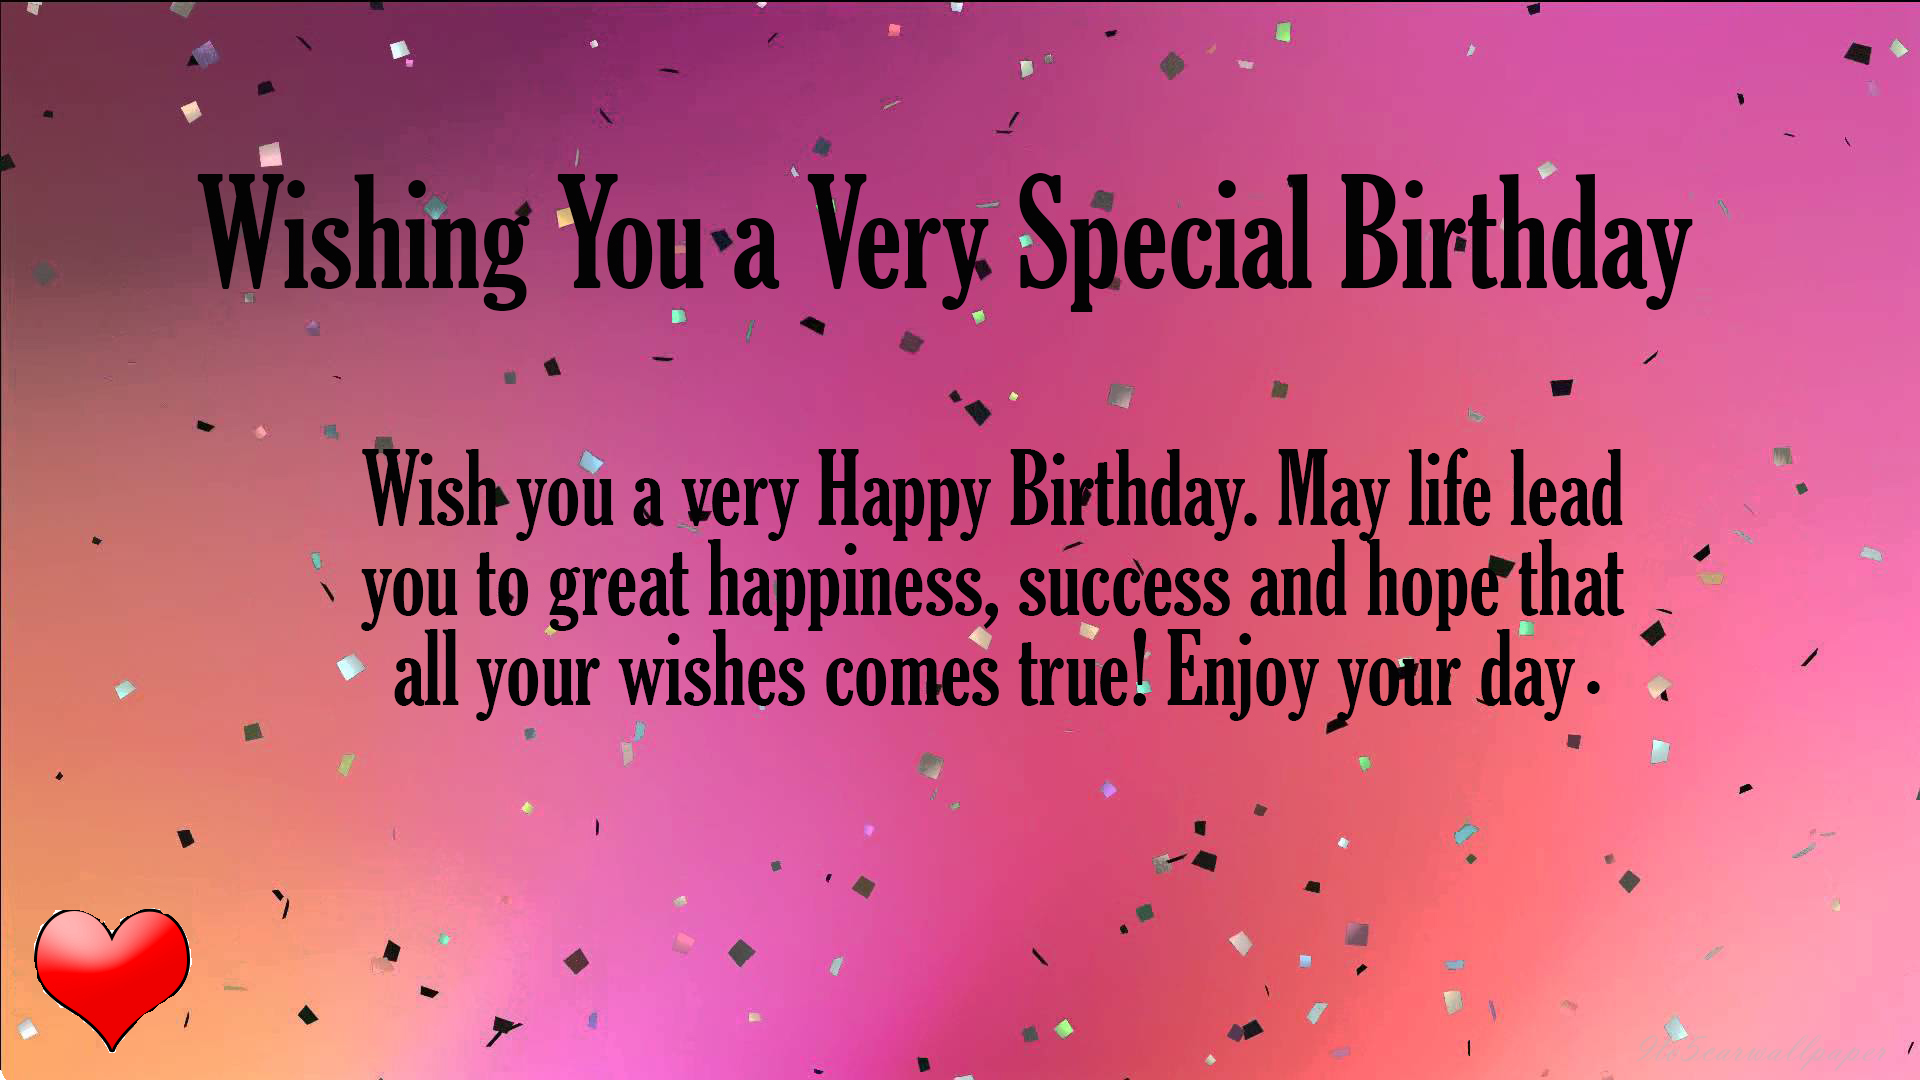 2018-Images-for-Birthday-Wishes-Quotes-Cards-and-Greetings-Download